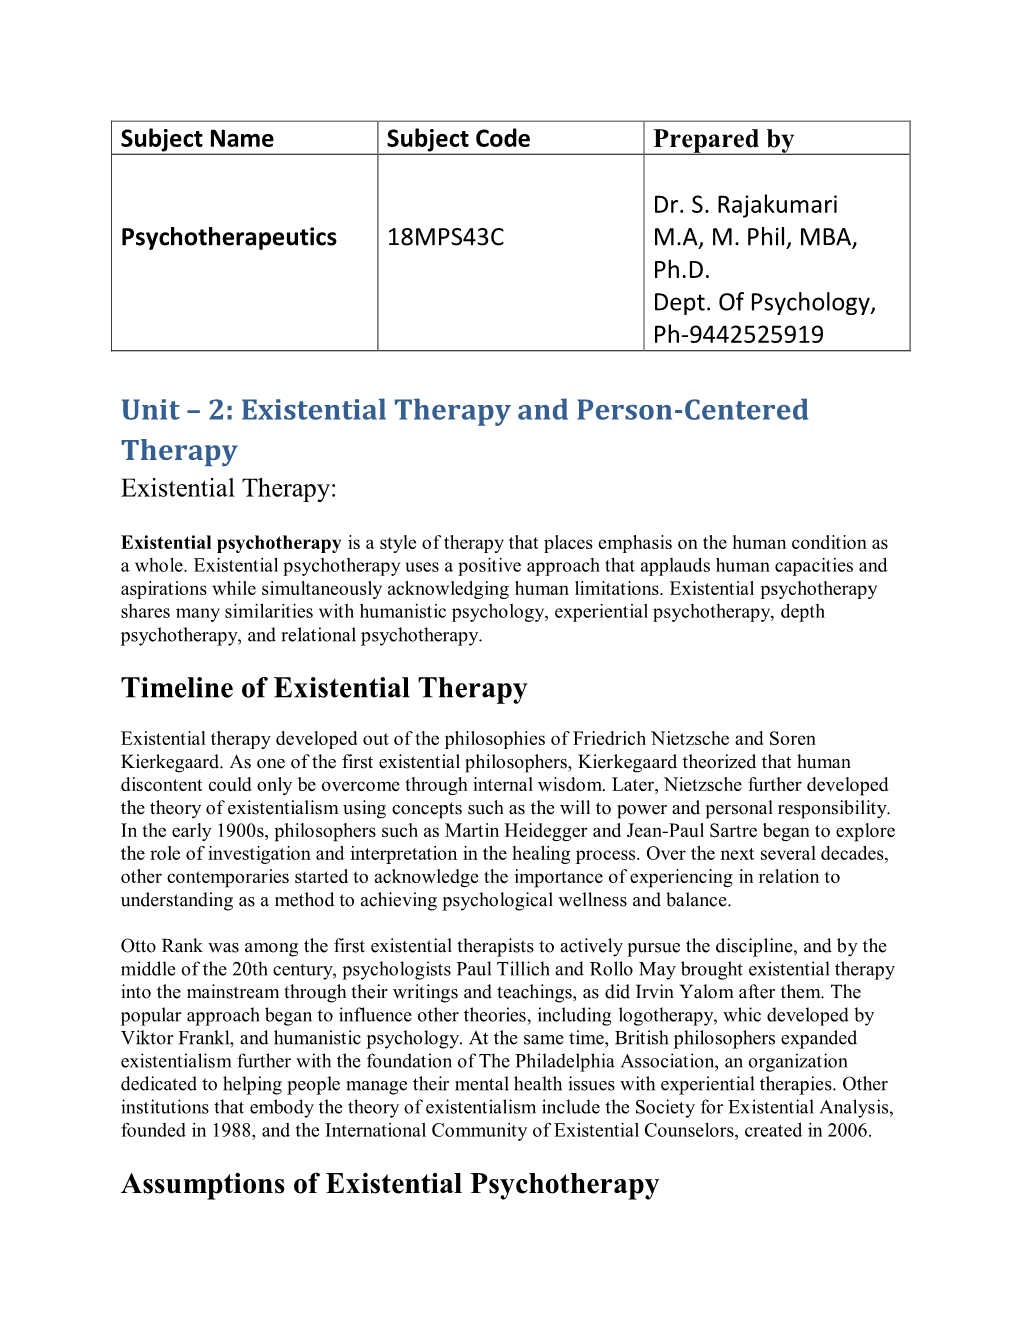 Unit – 2: Existential Therapy and Person-Centered Therapy Timeline